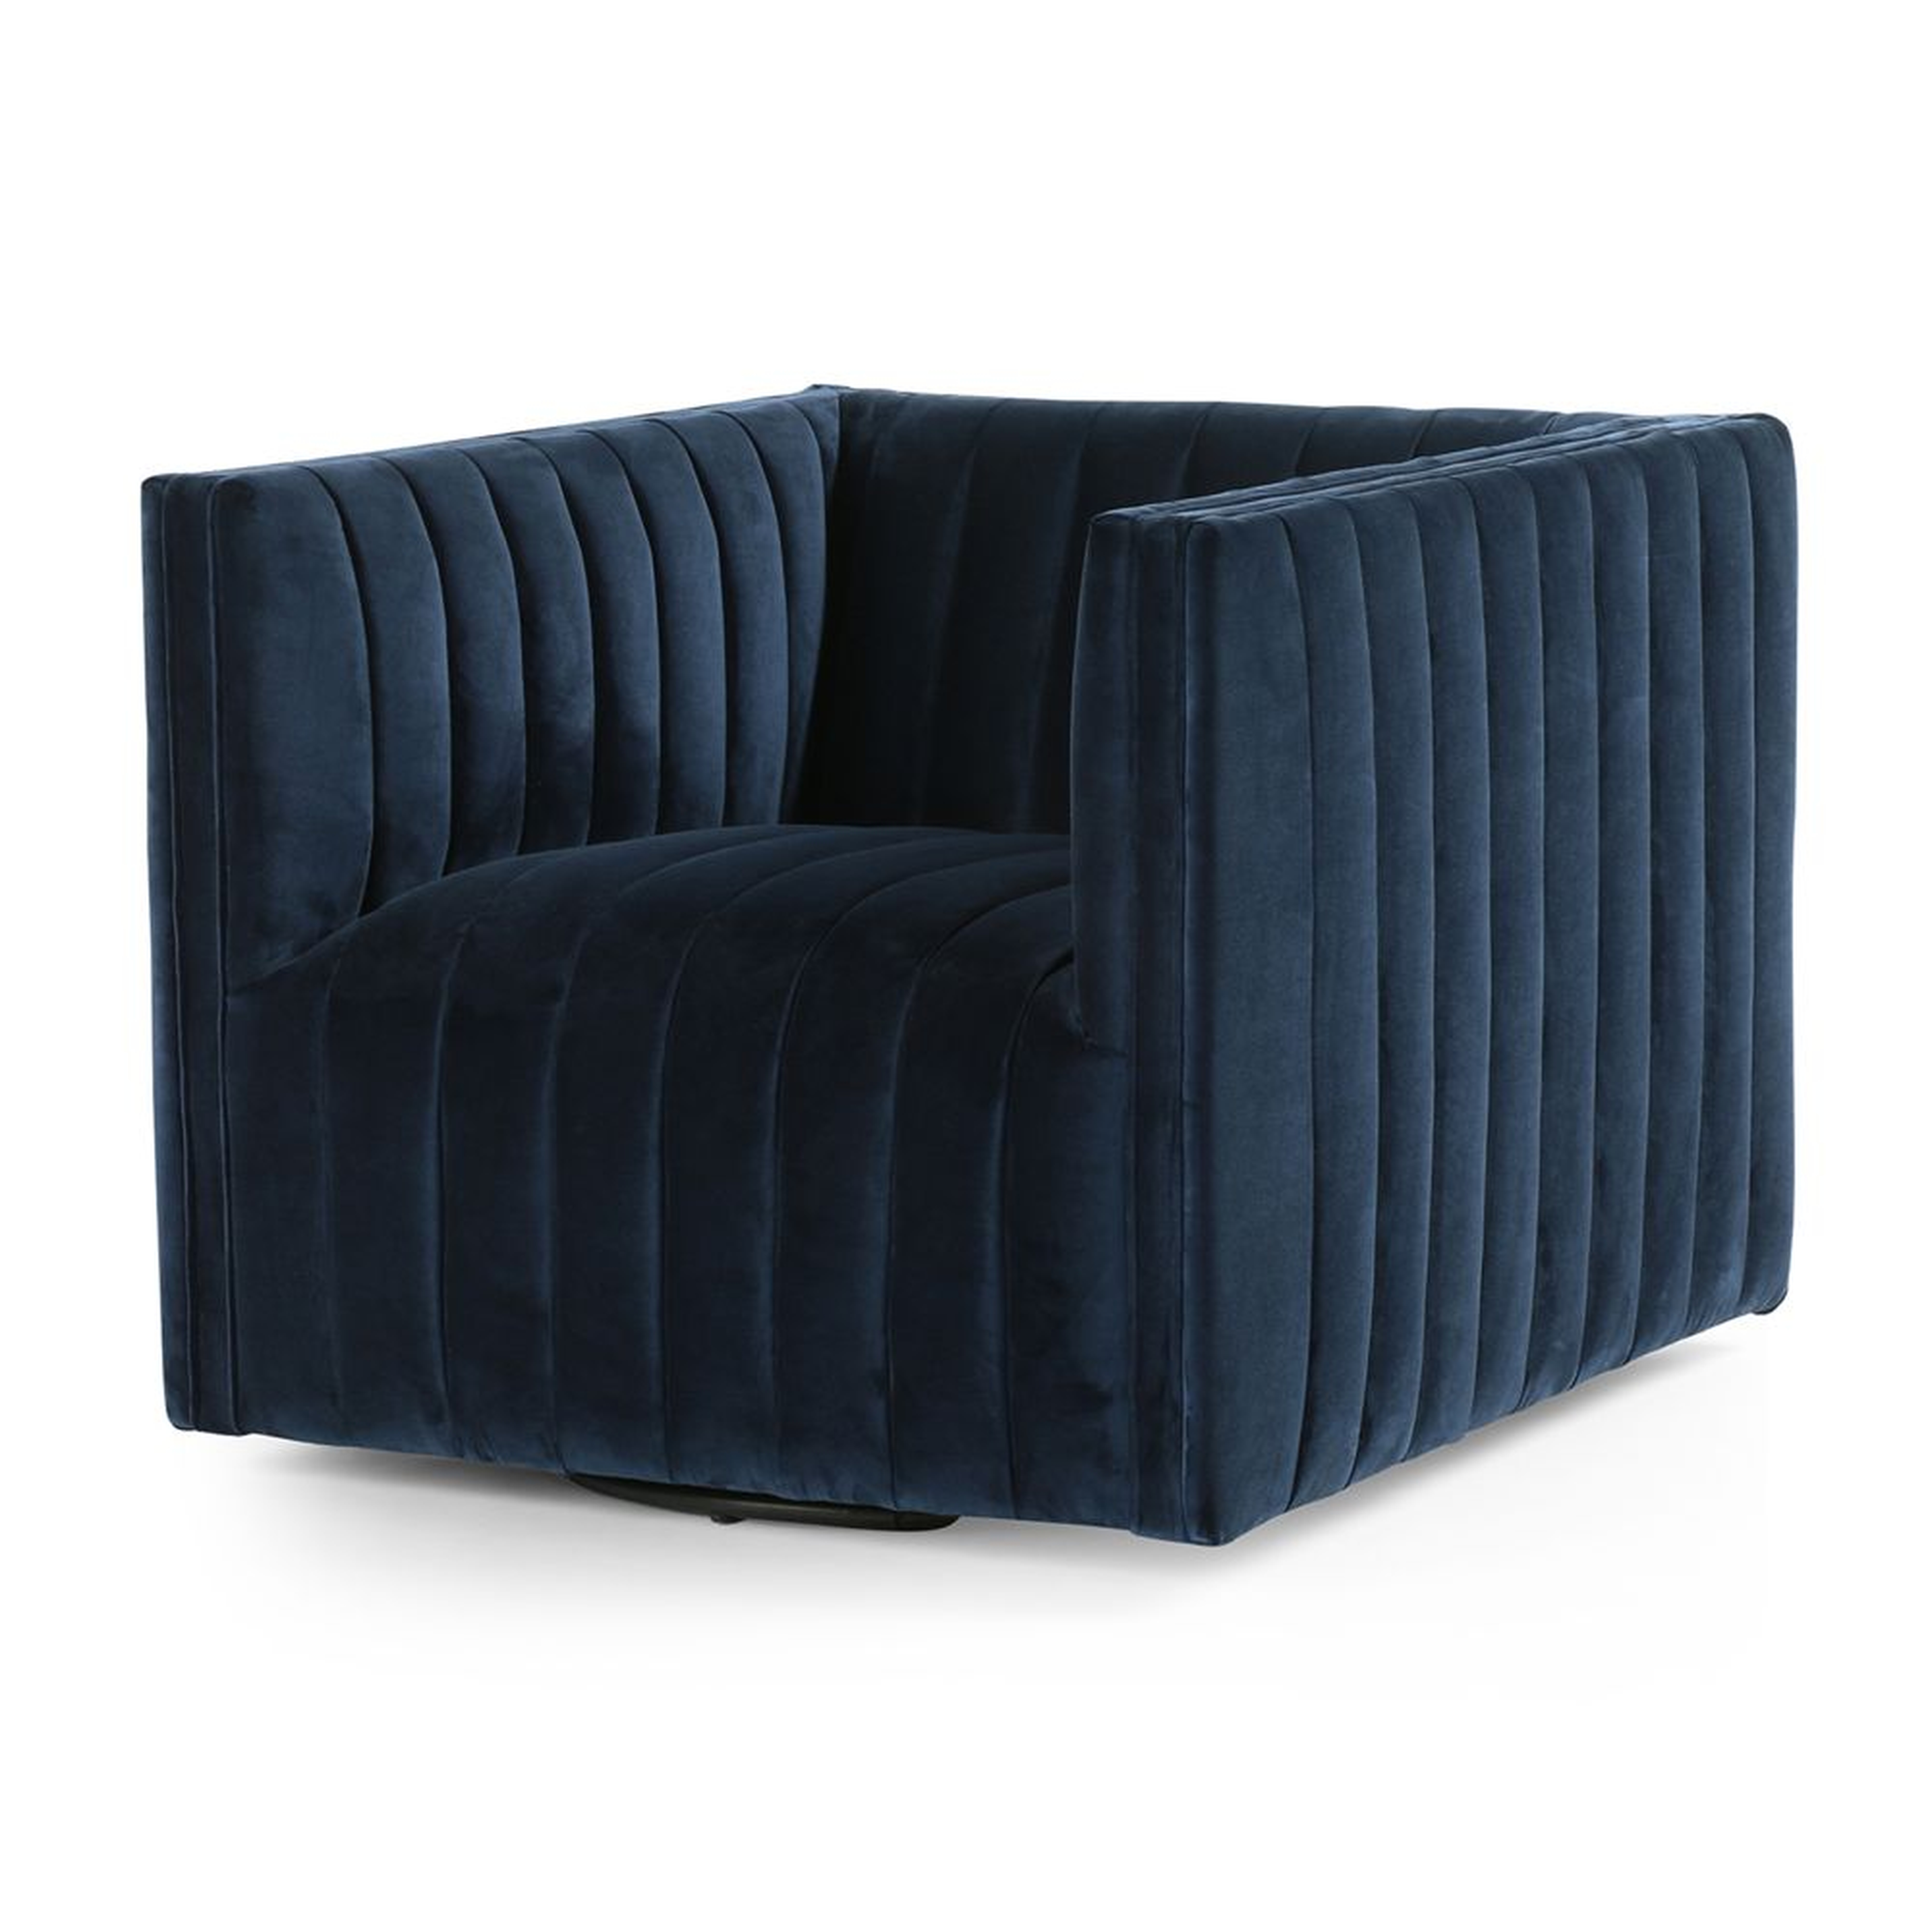 Cosima Channel Tufted Chair - Crate and Barrel